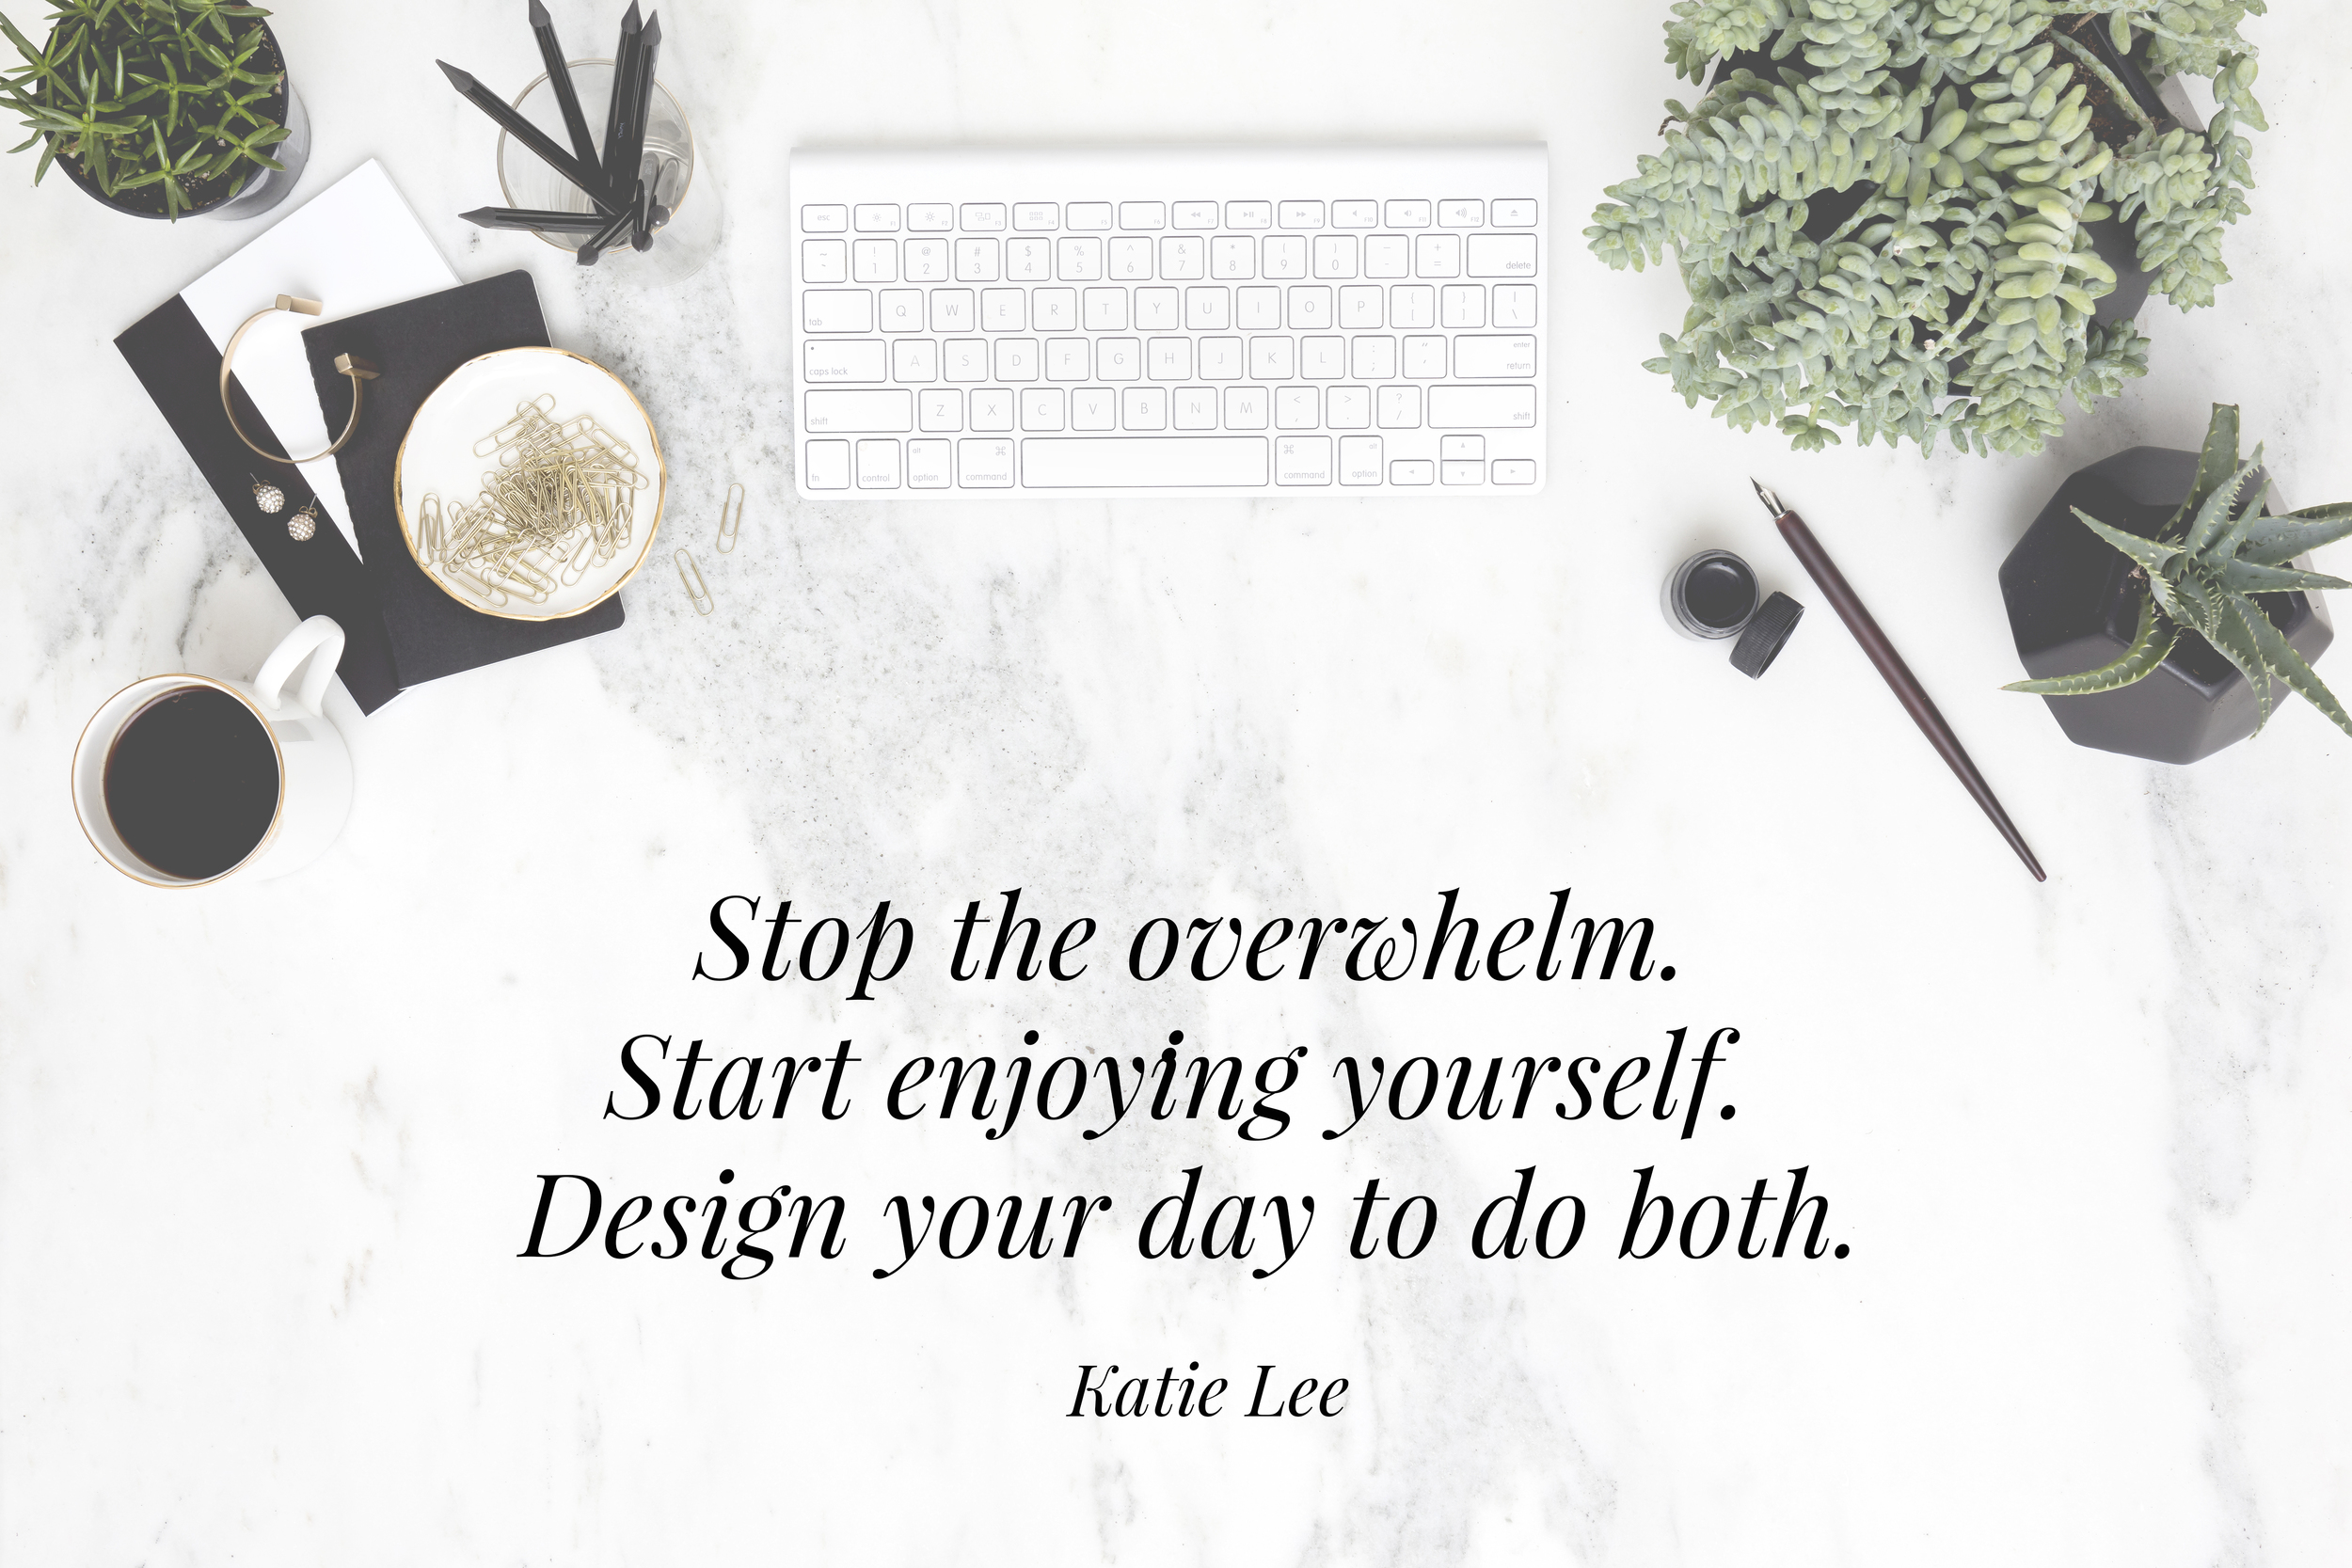  Katie Lee | Online course | How to have a productive day | The School of Styling -  theschoolofstyling.com  